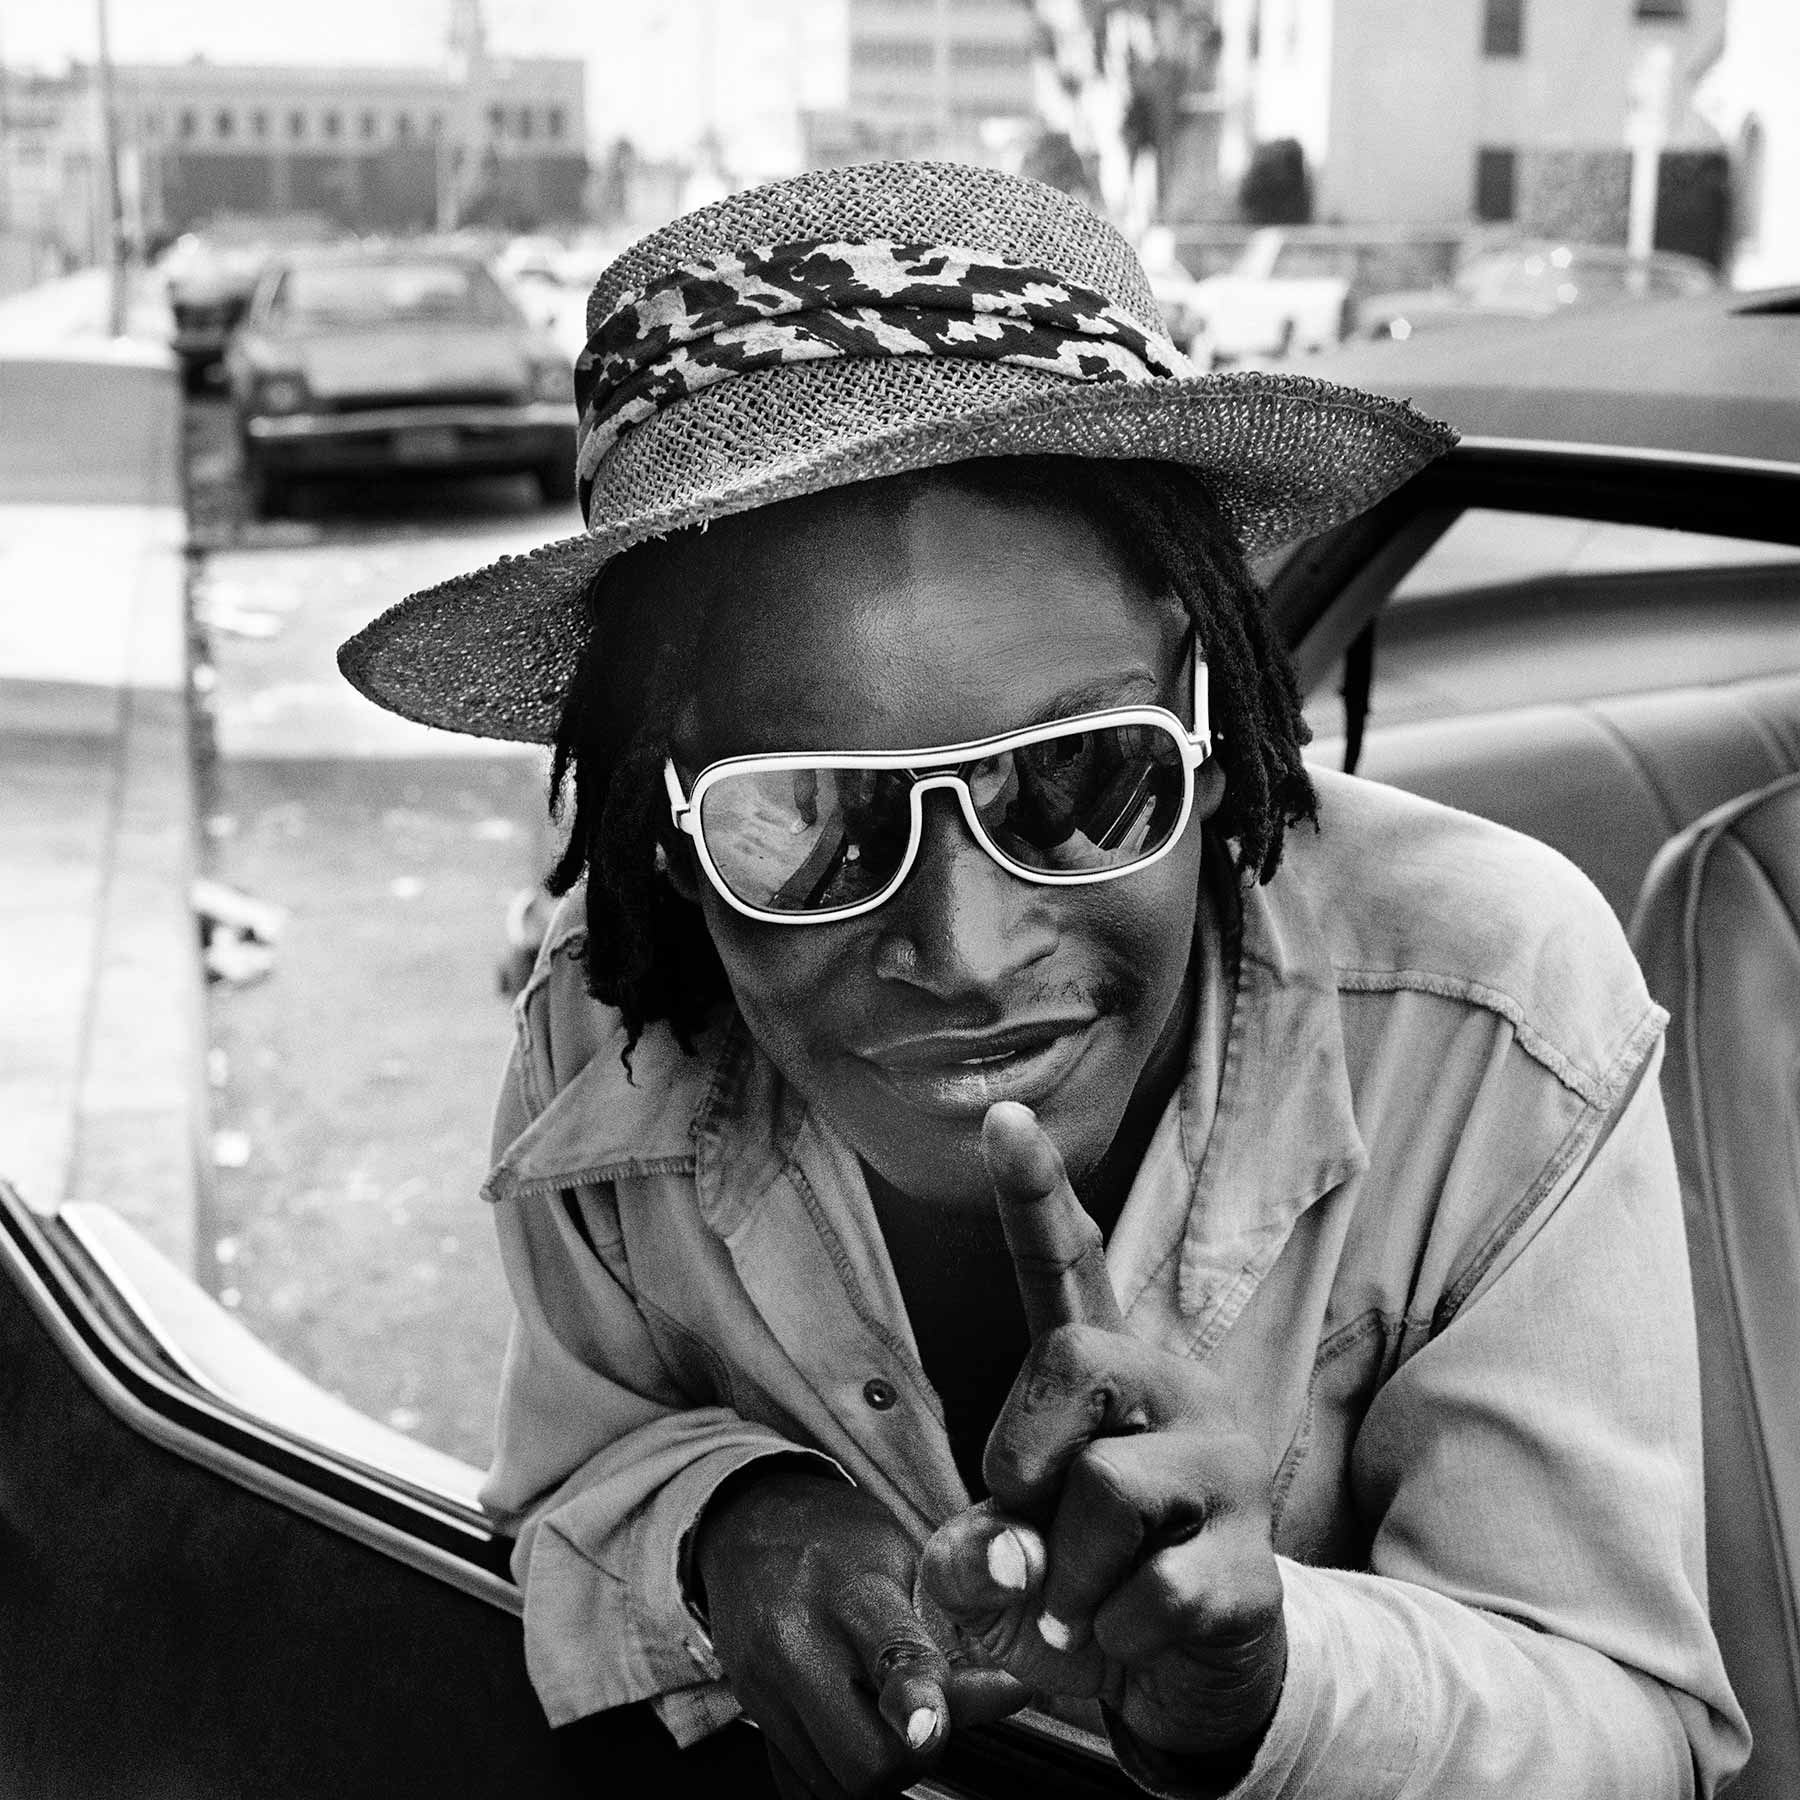 Personnage cool – Hollywood, Los Angeles, California, 1983